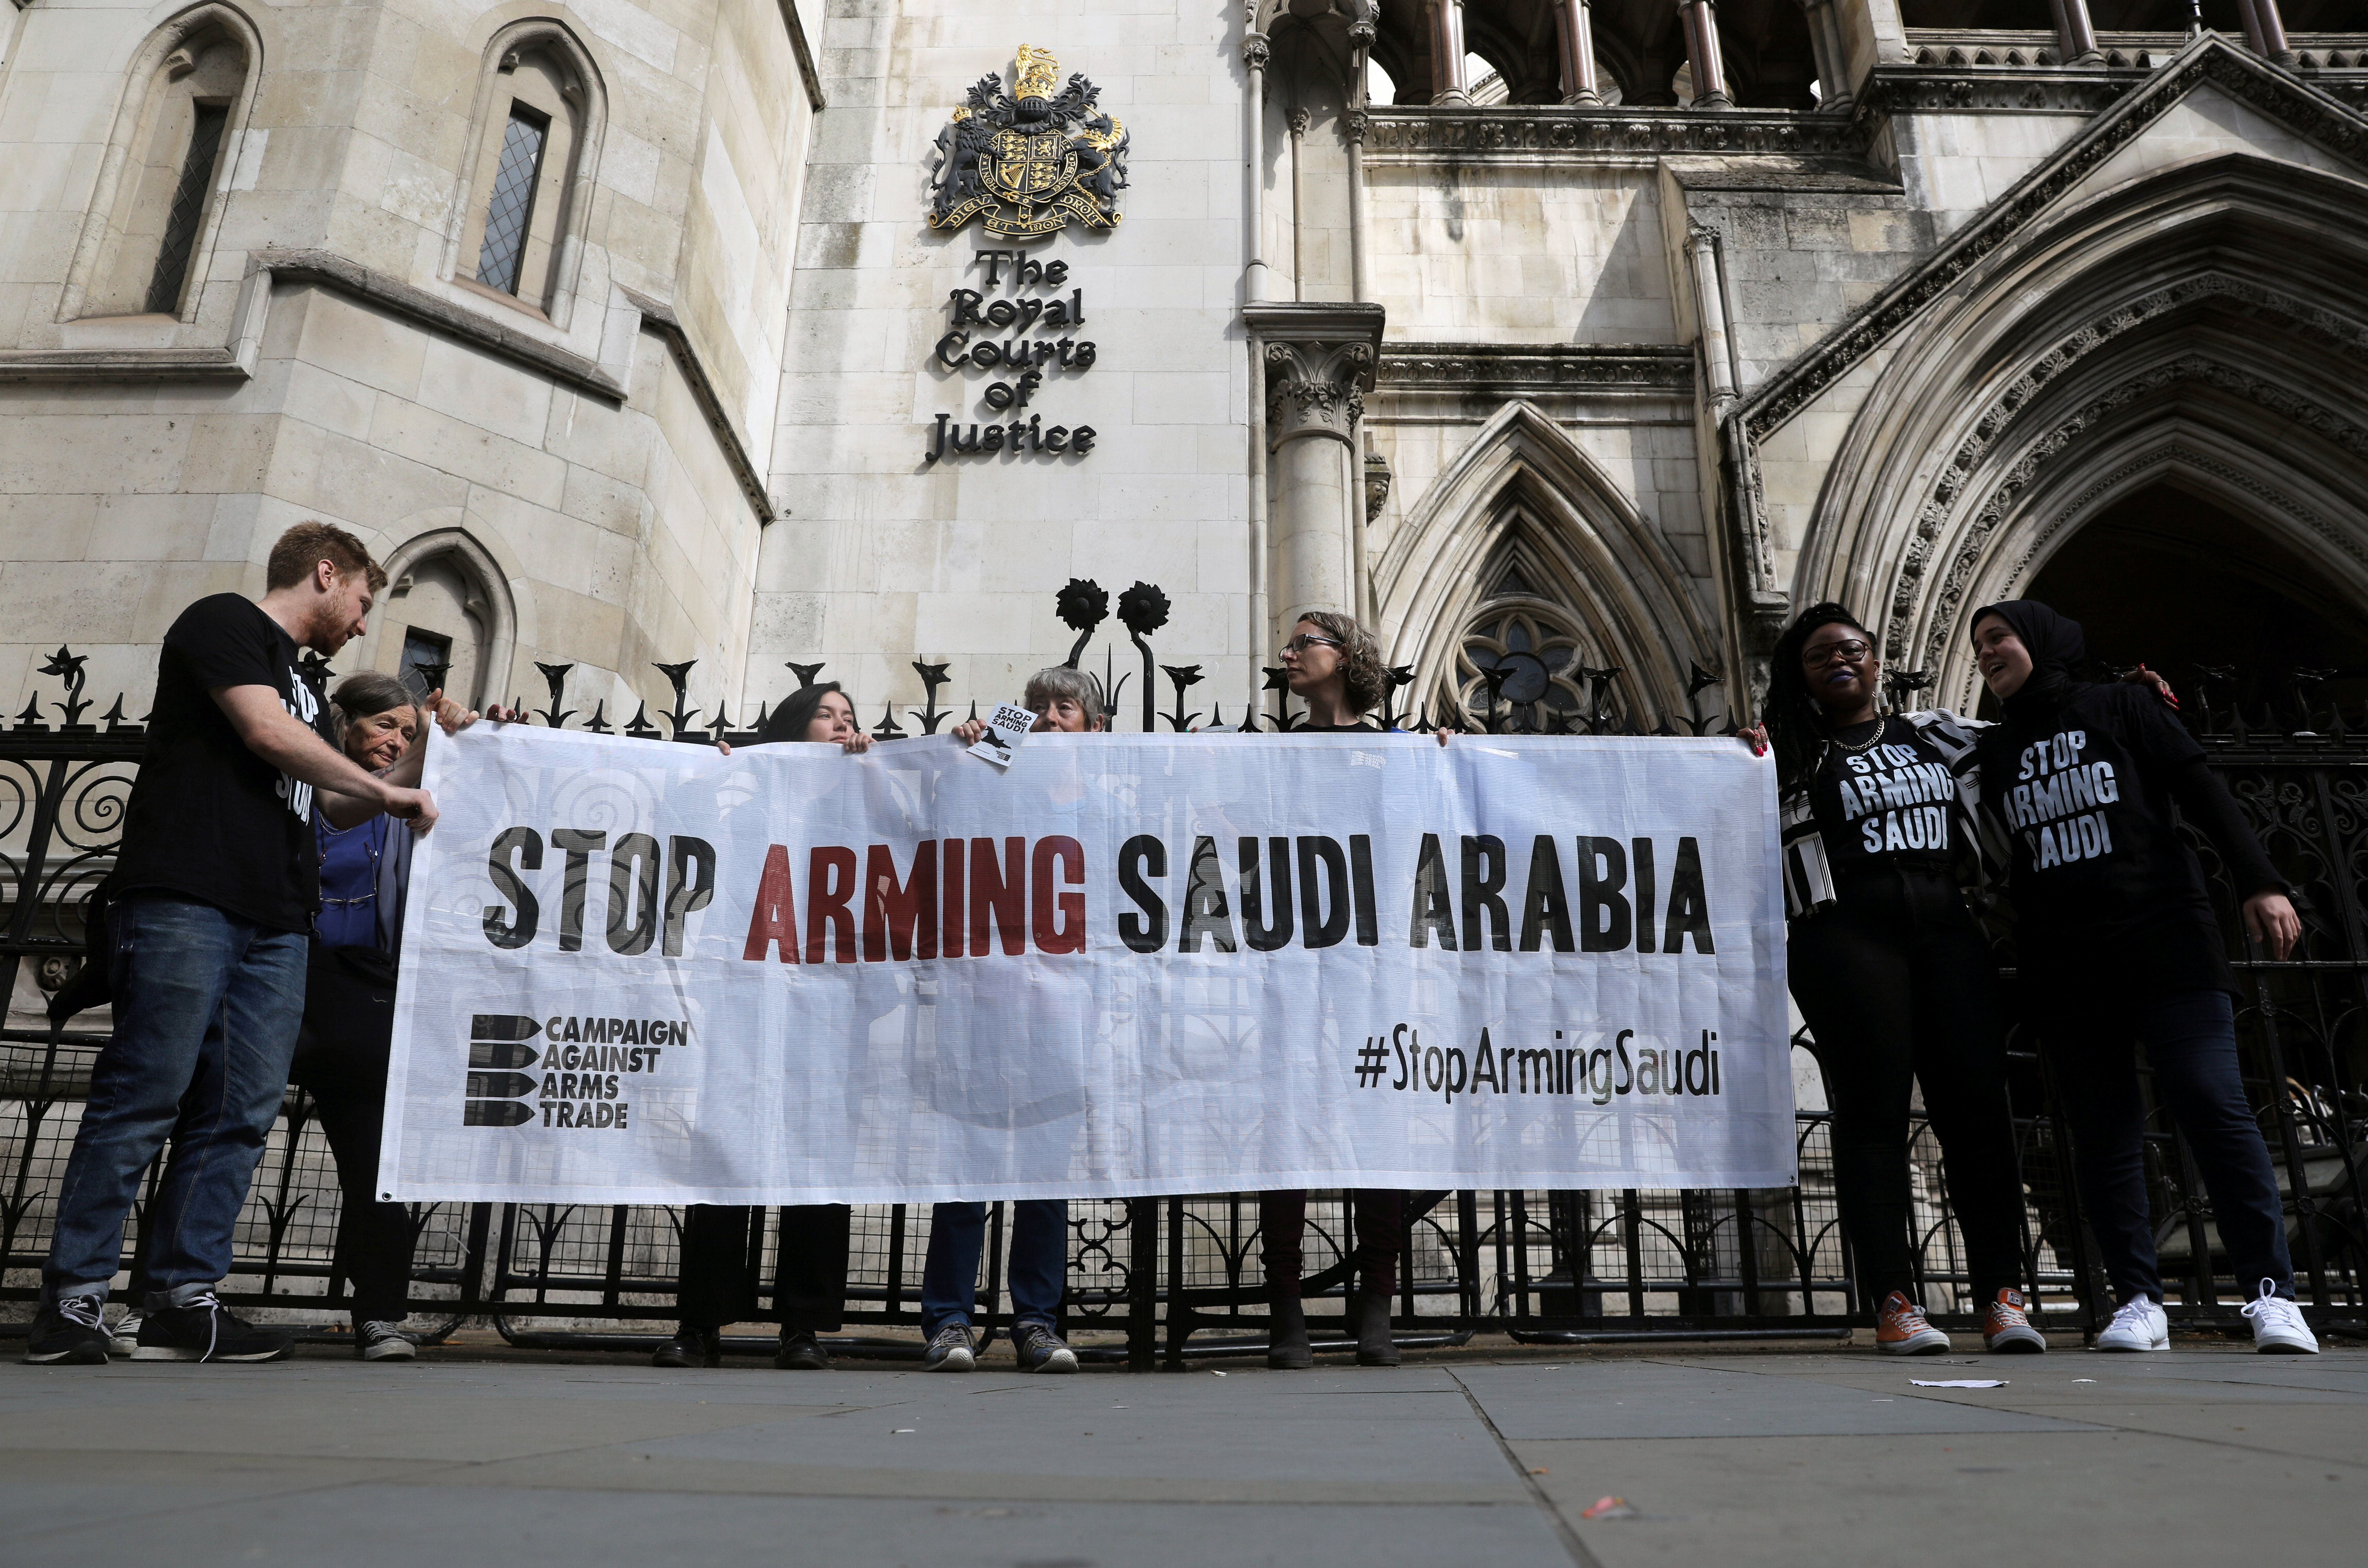 British Court of Appeal rules on Saudi arms exports in London